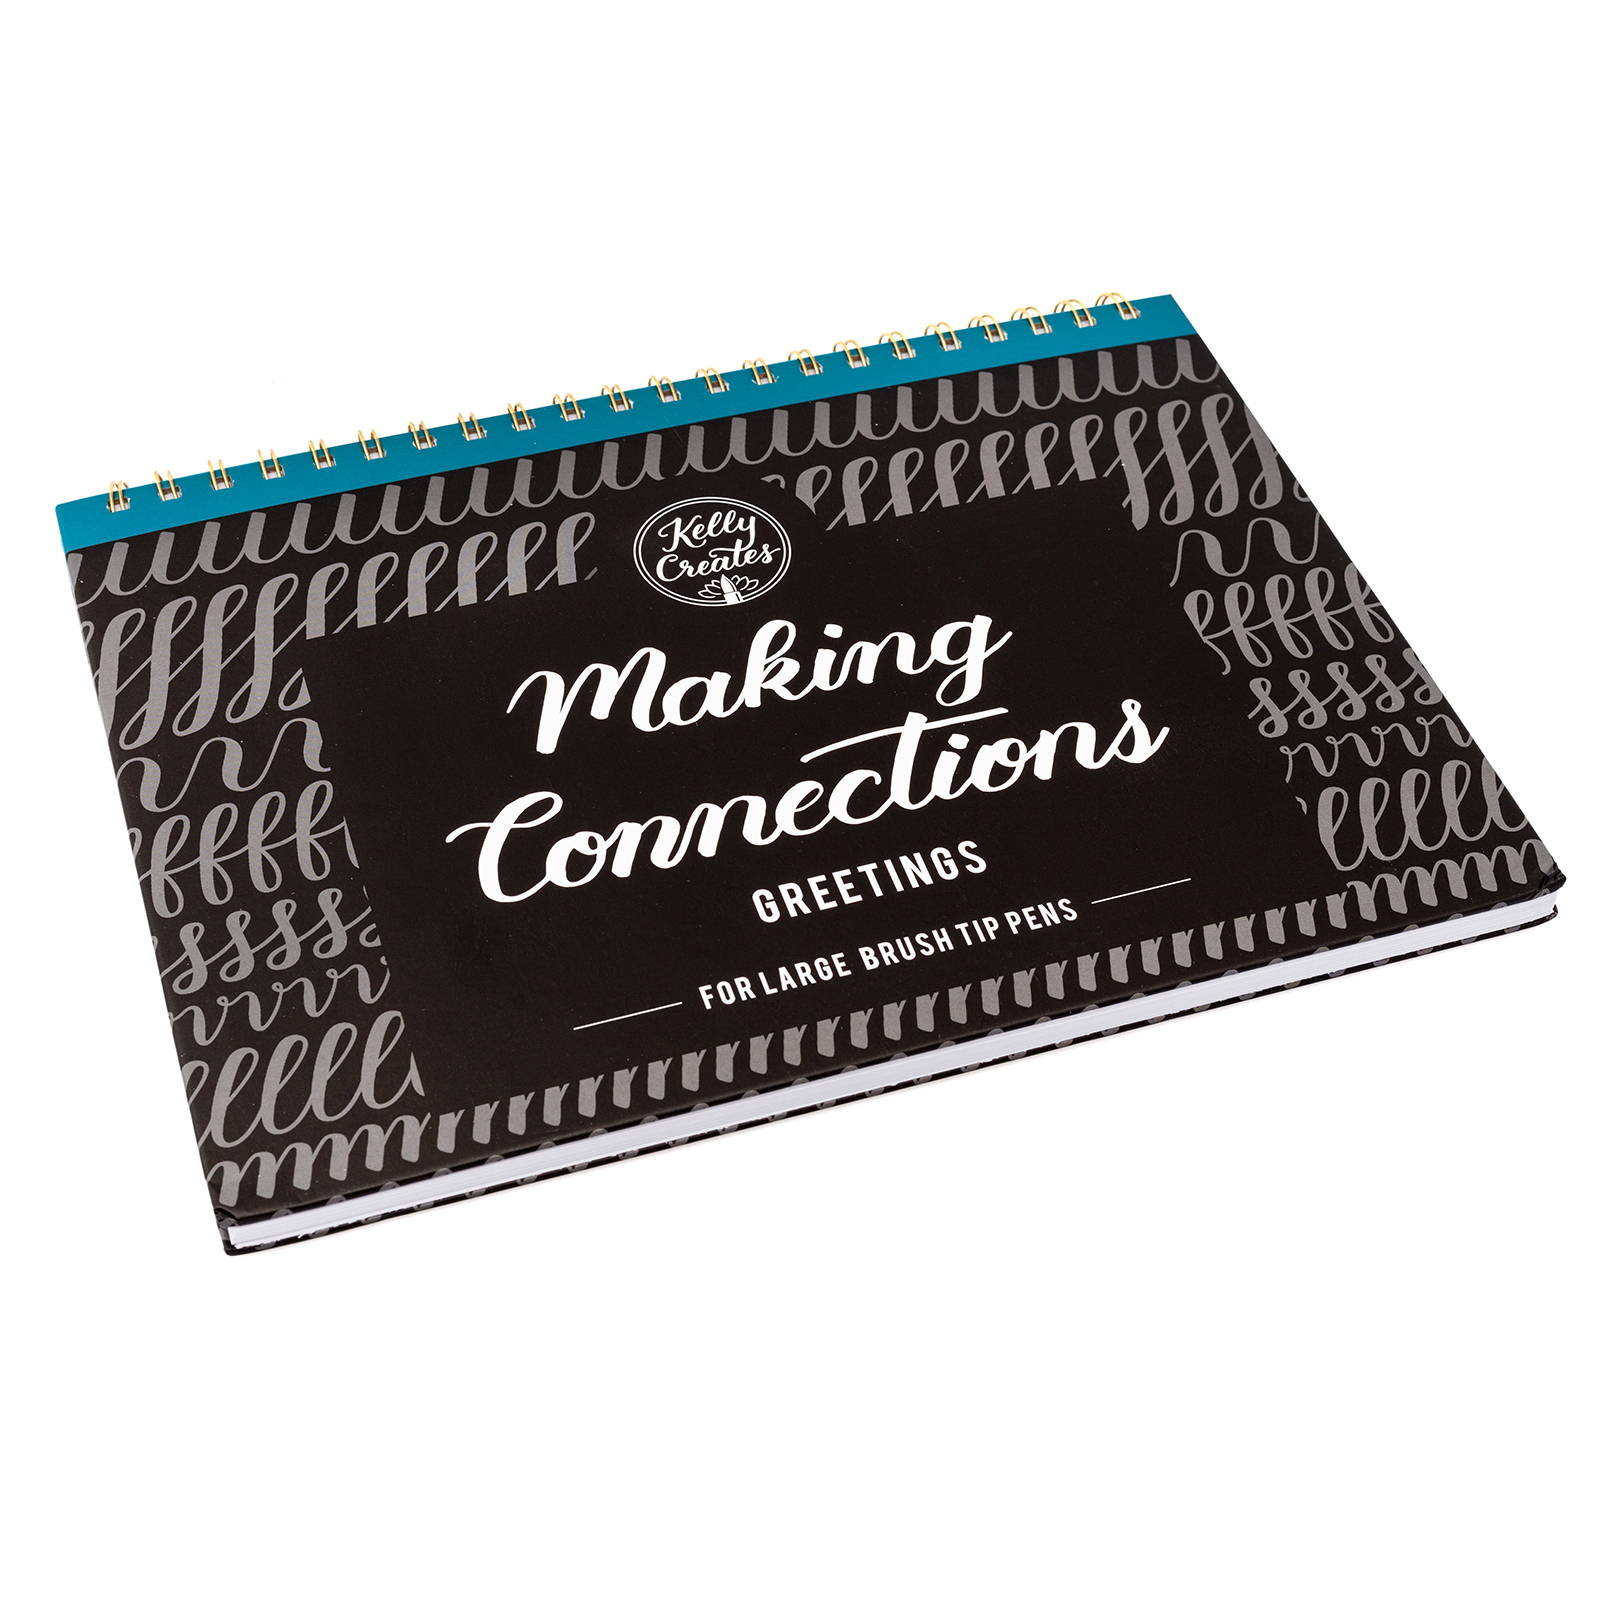 Kelly Creates • Large brush connections workbook greetings